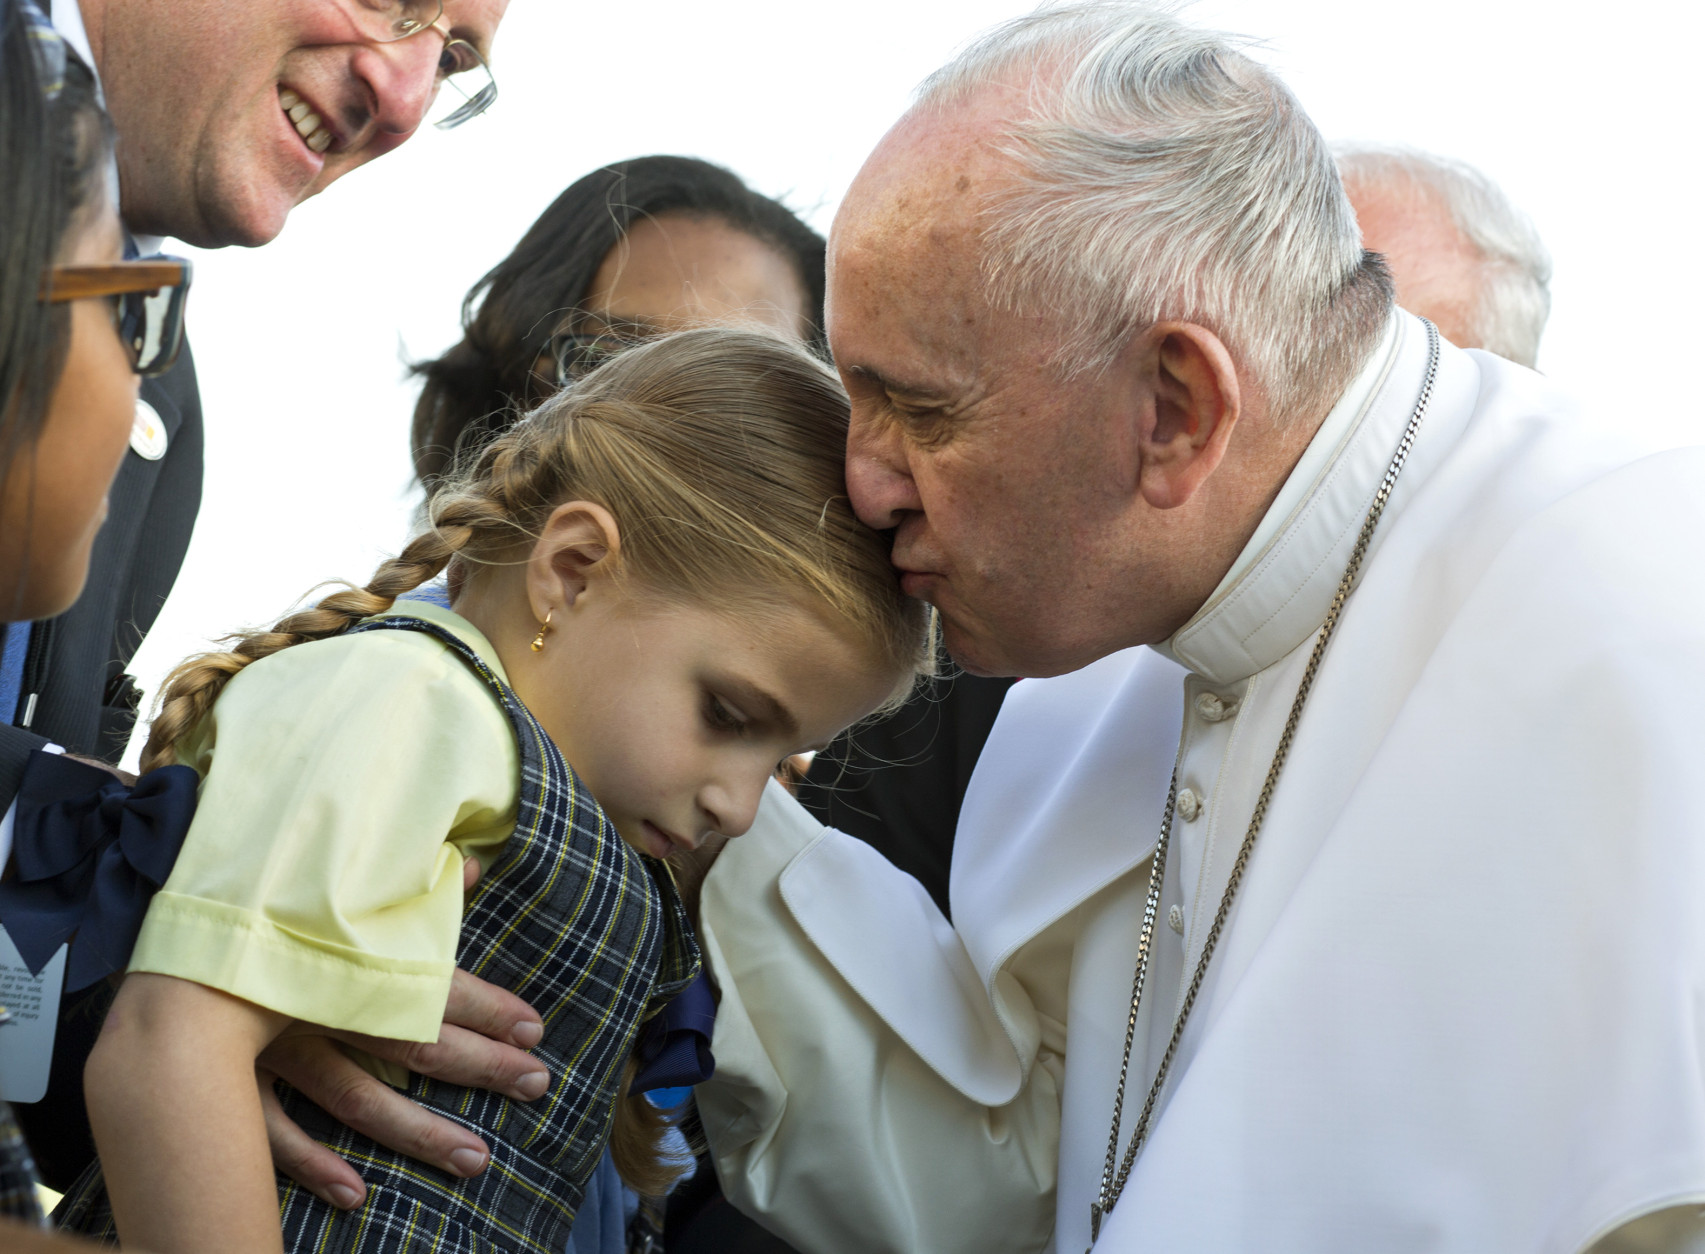 Pope Francis kisses Maria Teresa Heyer, a 1st grade student from the Brooklyn borough of New York, as the pope is greeted by Heyer and other students who gave him gifts as he arrives at John F. Kennedy International Airport Thursday, Sept. 24, 2015, in New York.  (AP Photo/Craig Ruttle, Pool)